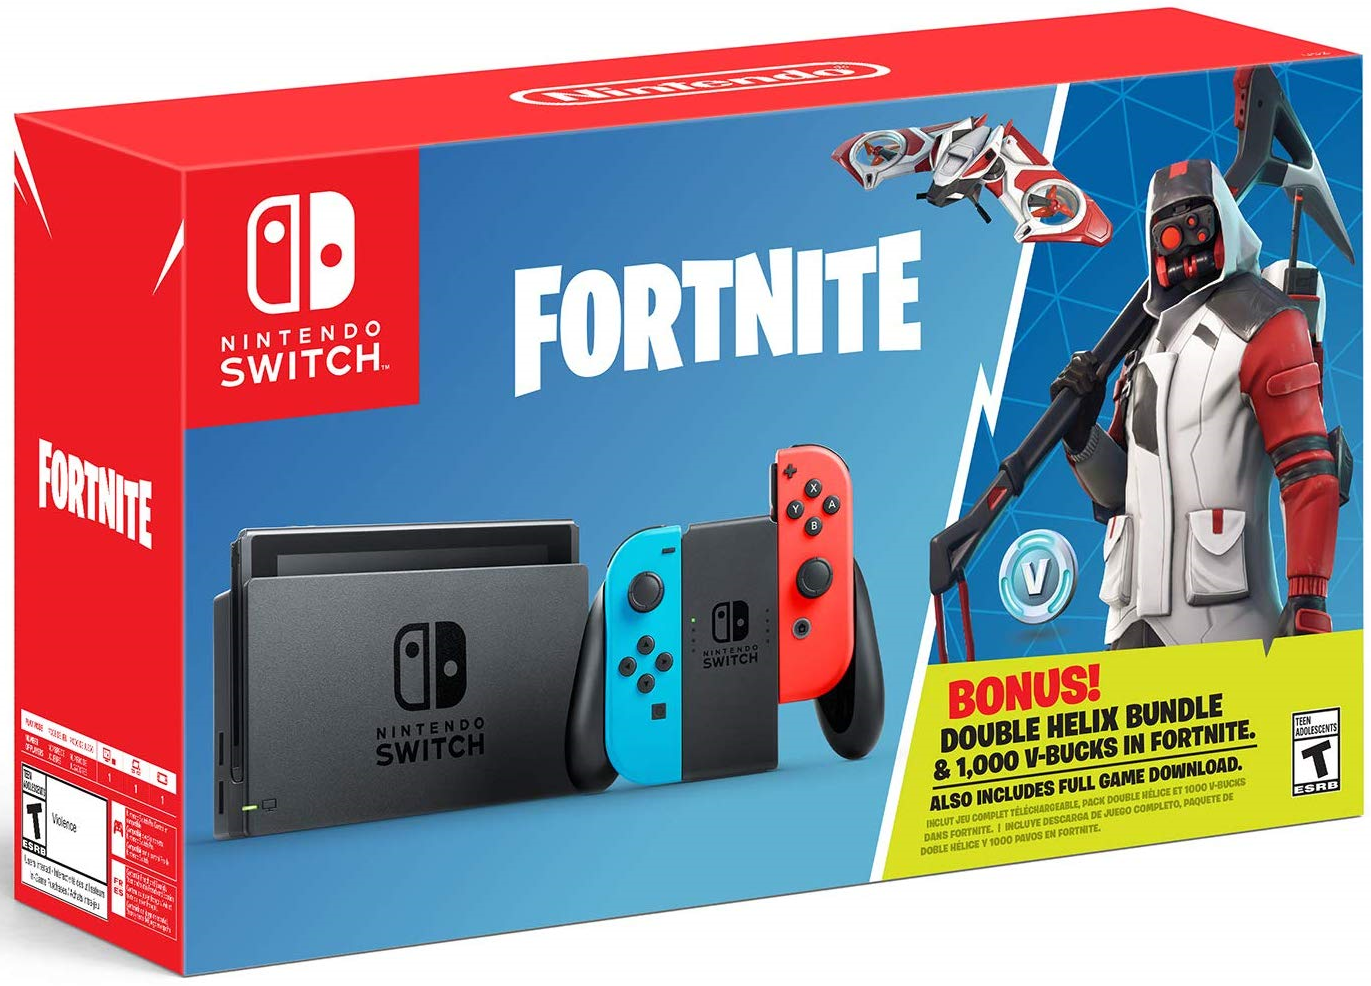 a new nintendo switch bundle is now available in stores and it offers the best value for fans of fortnite it s the perfect way for newcomers and super - fortnite v bucks on switch